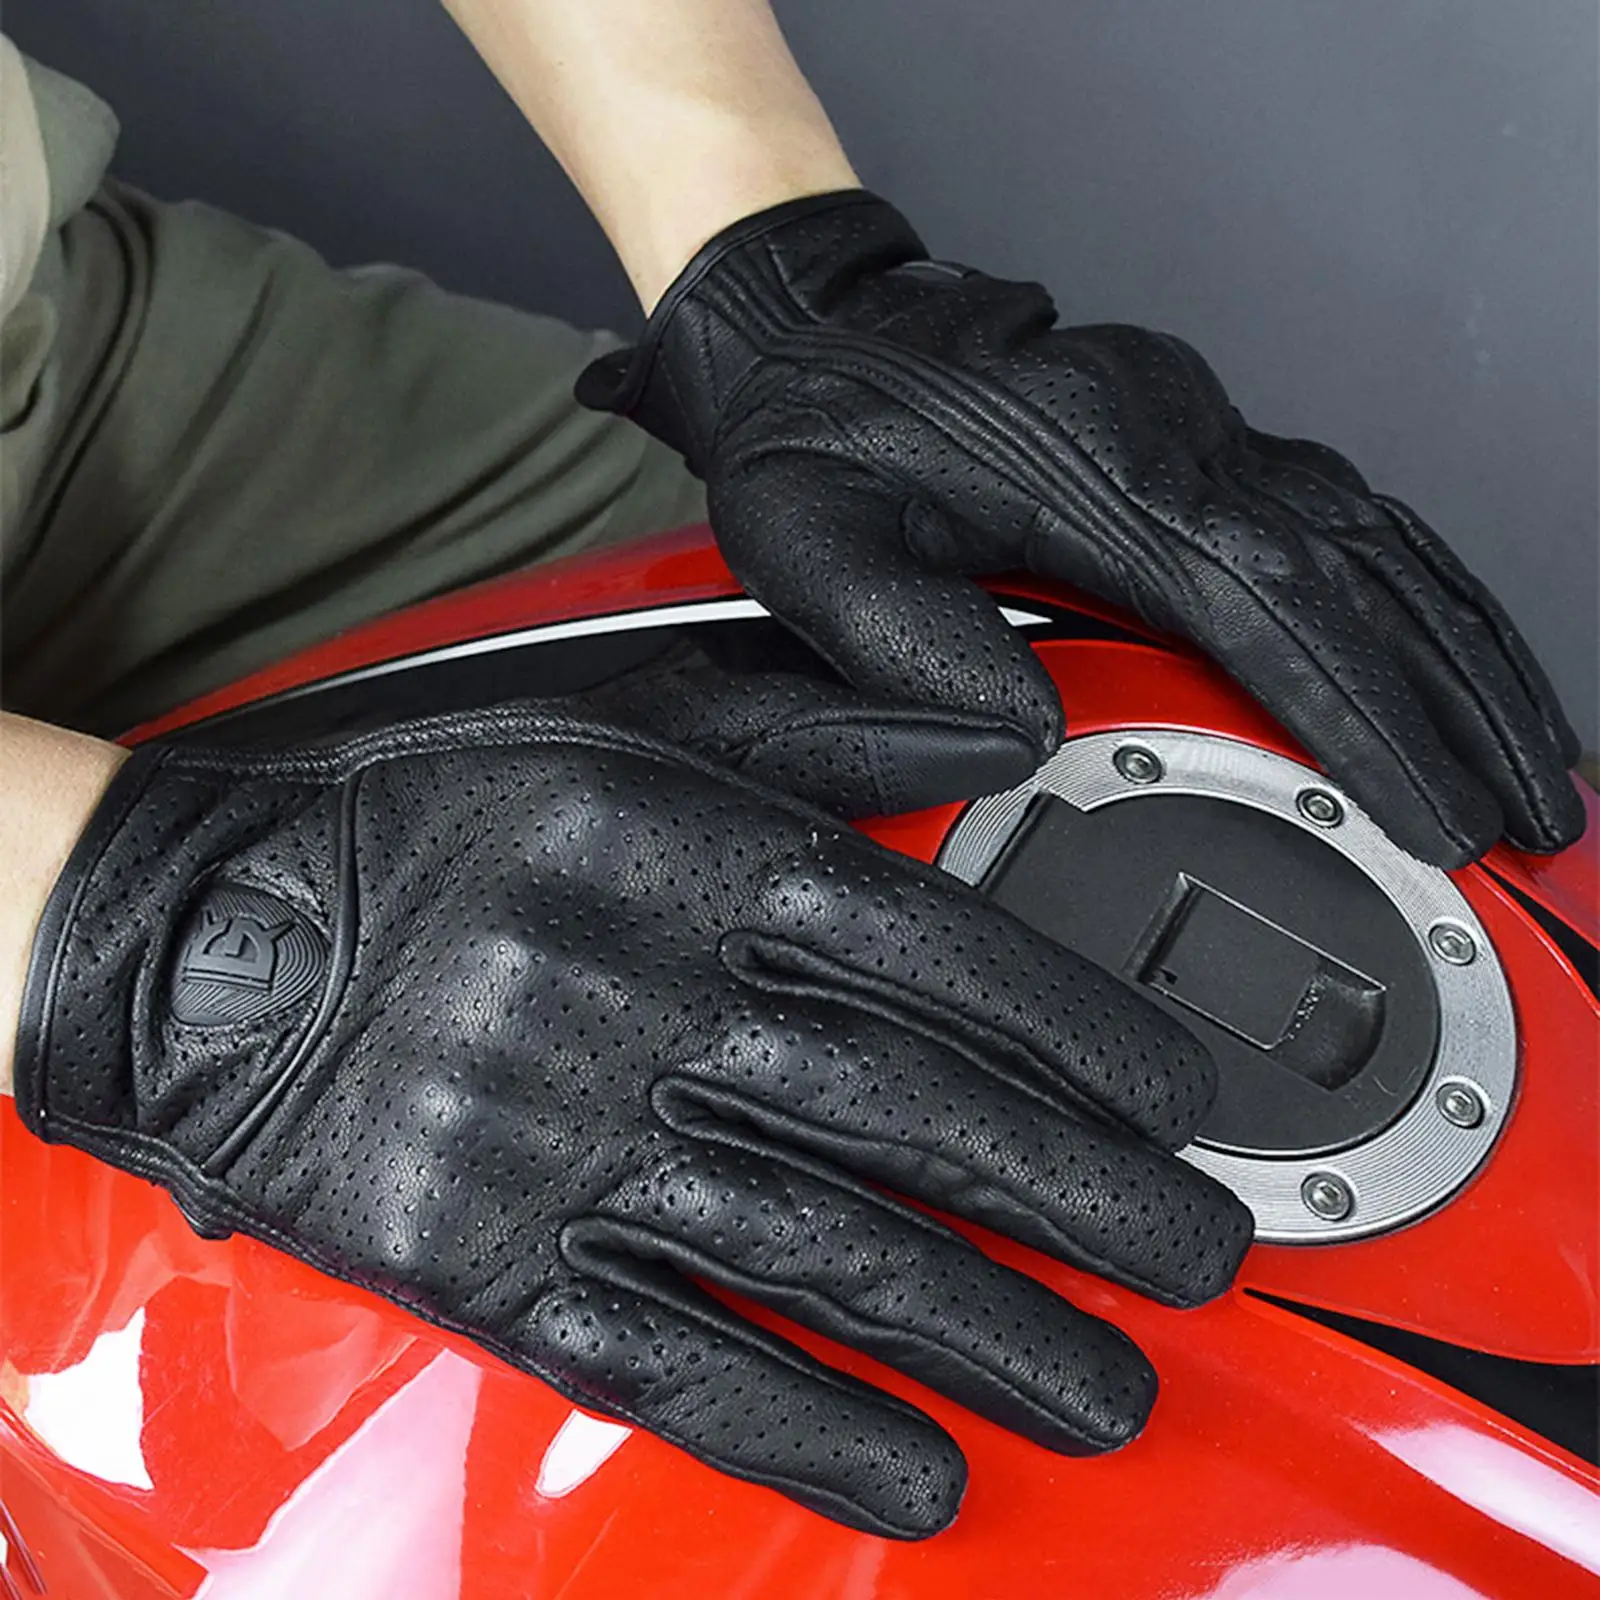 Motorcycle Gloves Full Finger Protective Gloves Breathable Perforated Real Leather Riding Cross Dirt Bike Gloves for Men Women